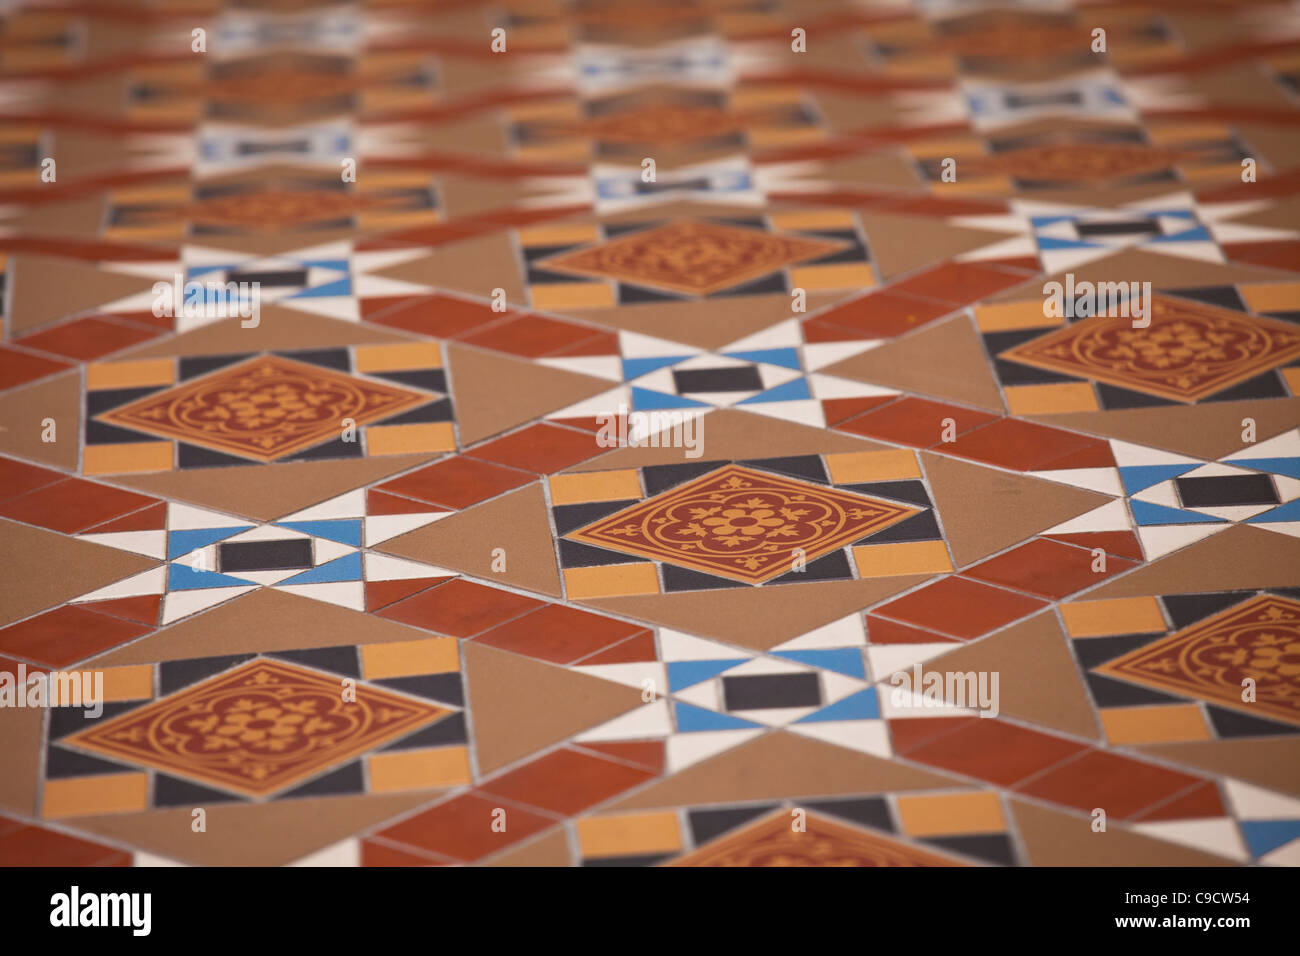 Melbourne historical patterned clay path floor tiles seen in both private and public houses thought the city. Stock Photo